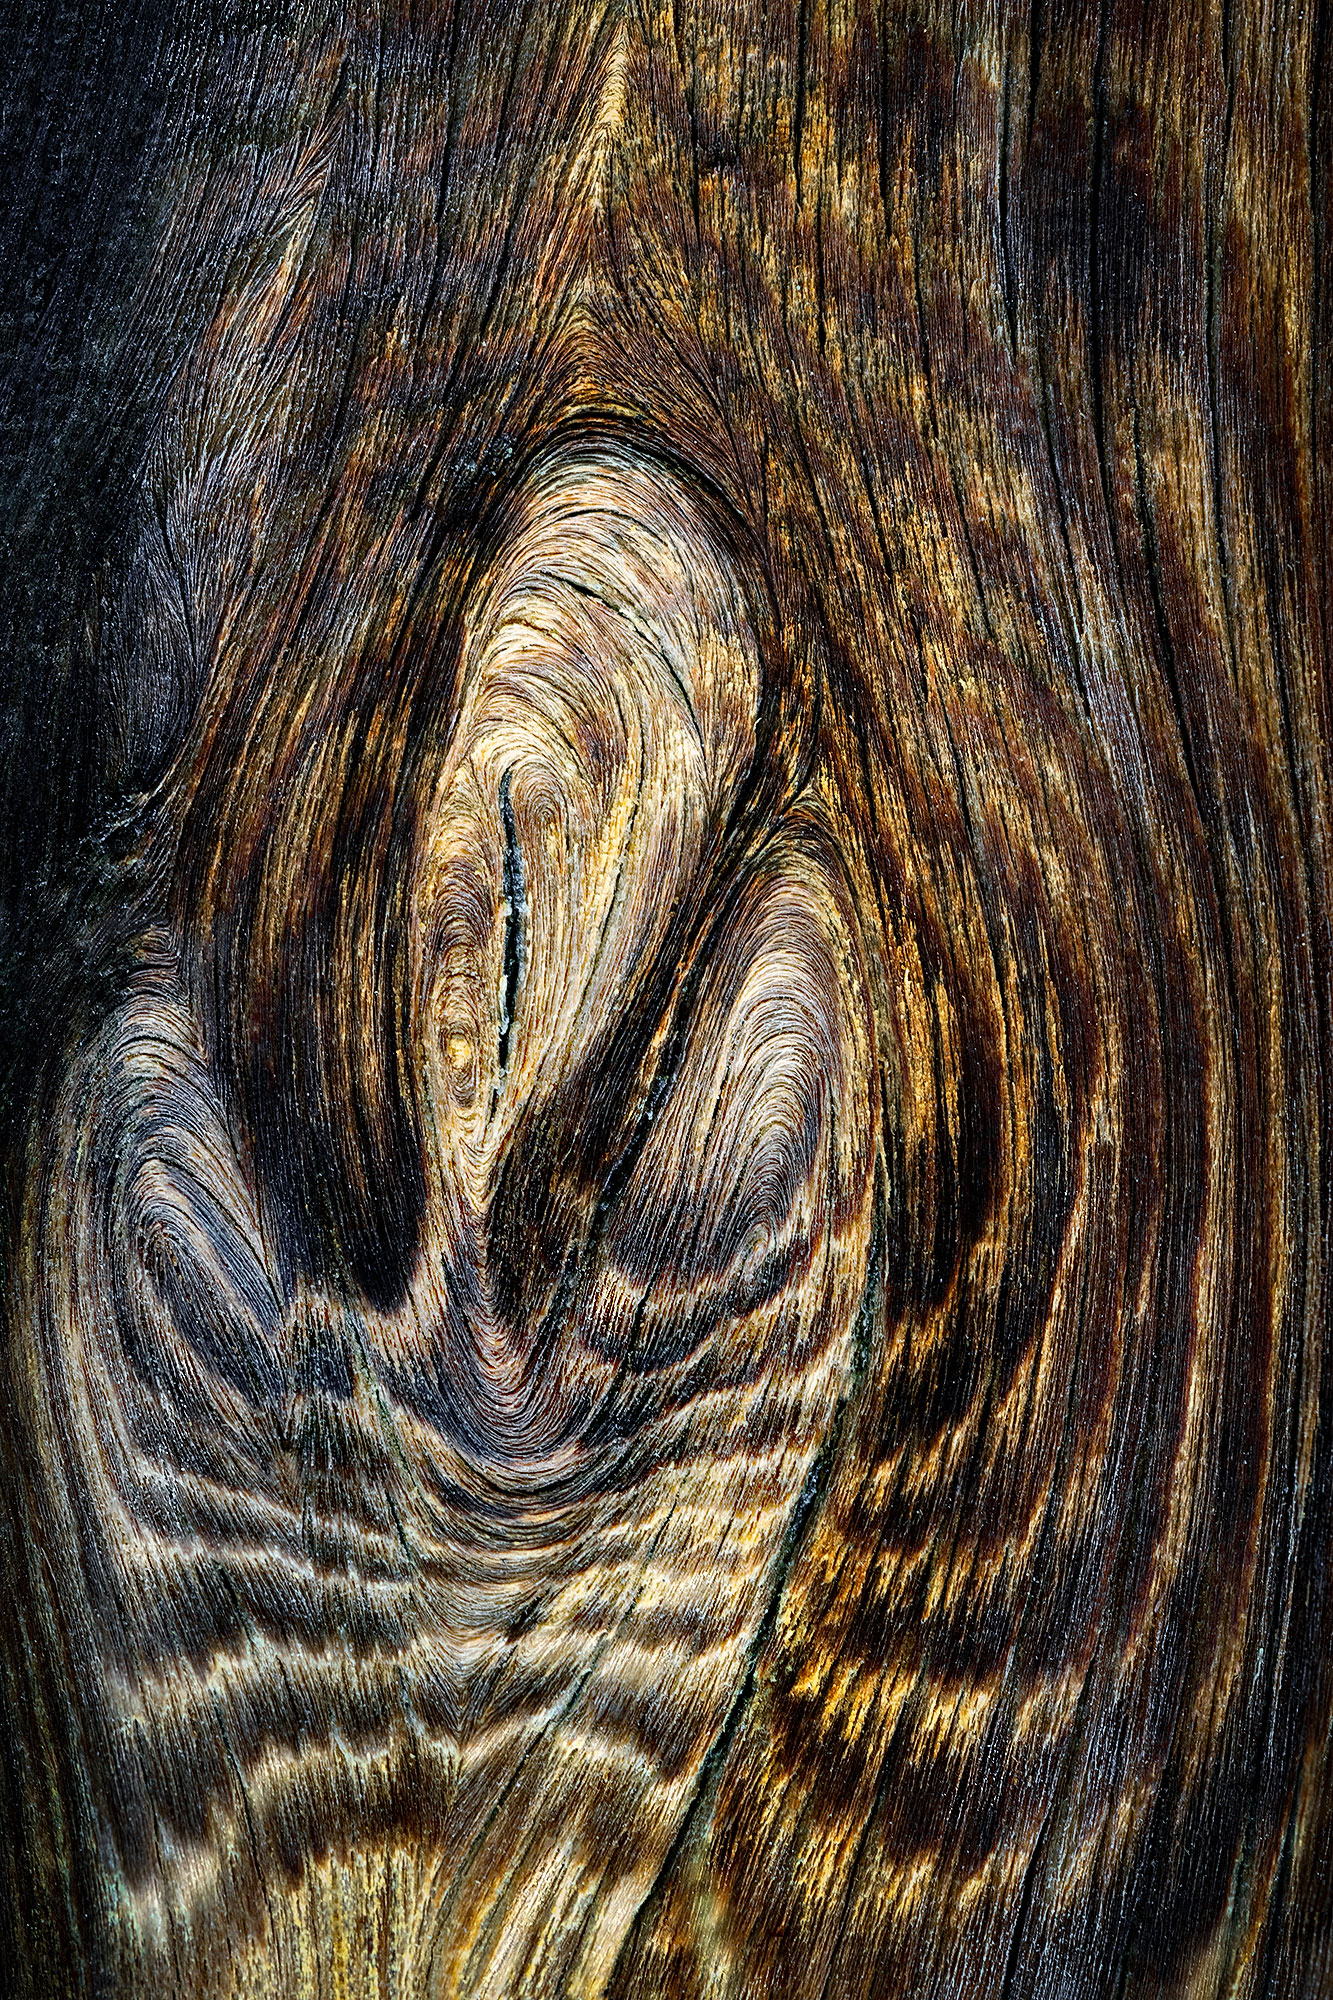 "Interlayered Complexion": Close-up photograph of wood showcasing a spiraling pattern resembling a human torso and head, evoking contemplation of the intricate layers of the human experience.